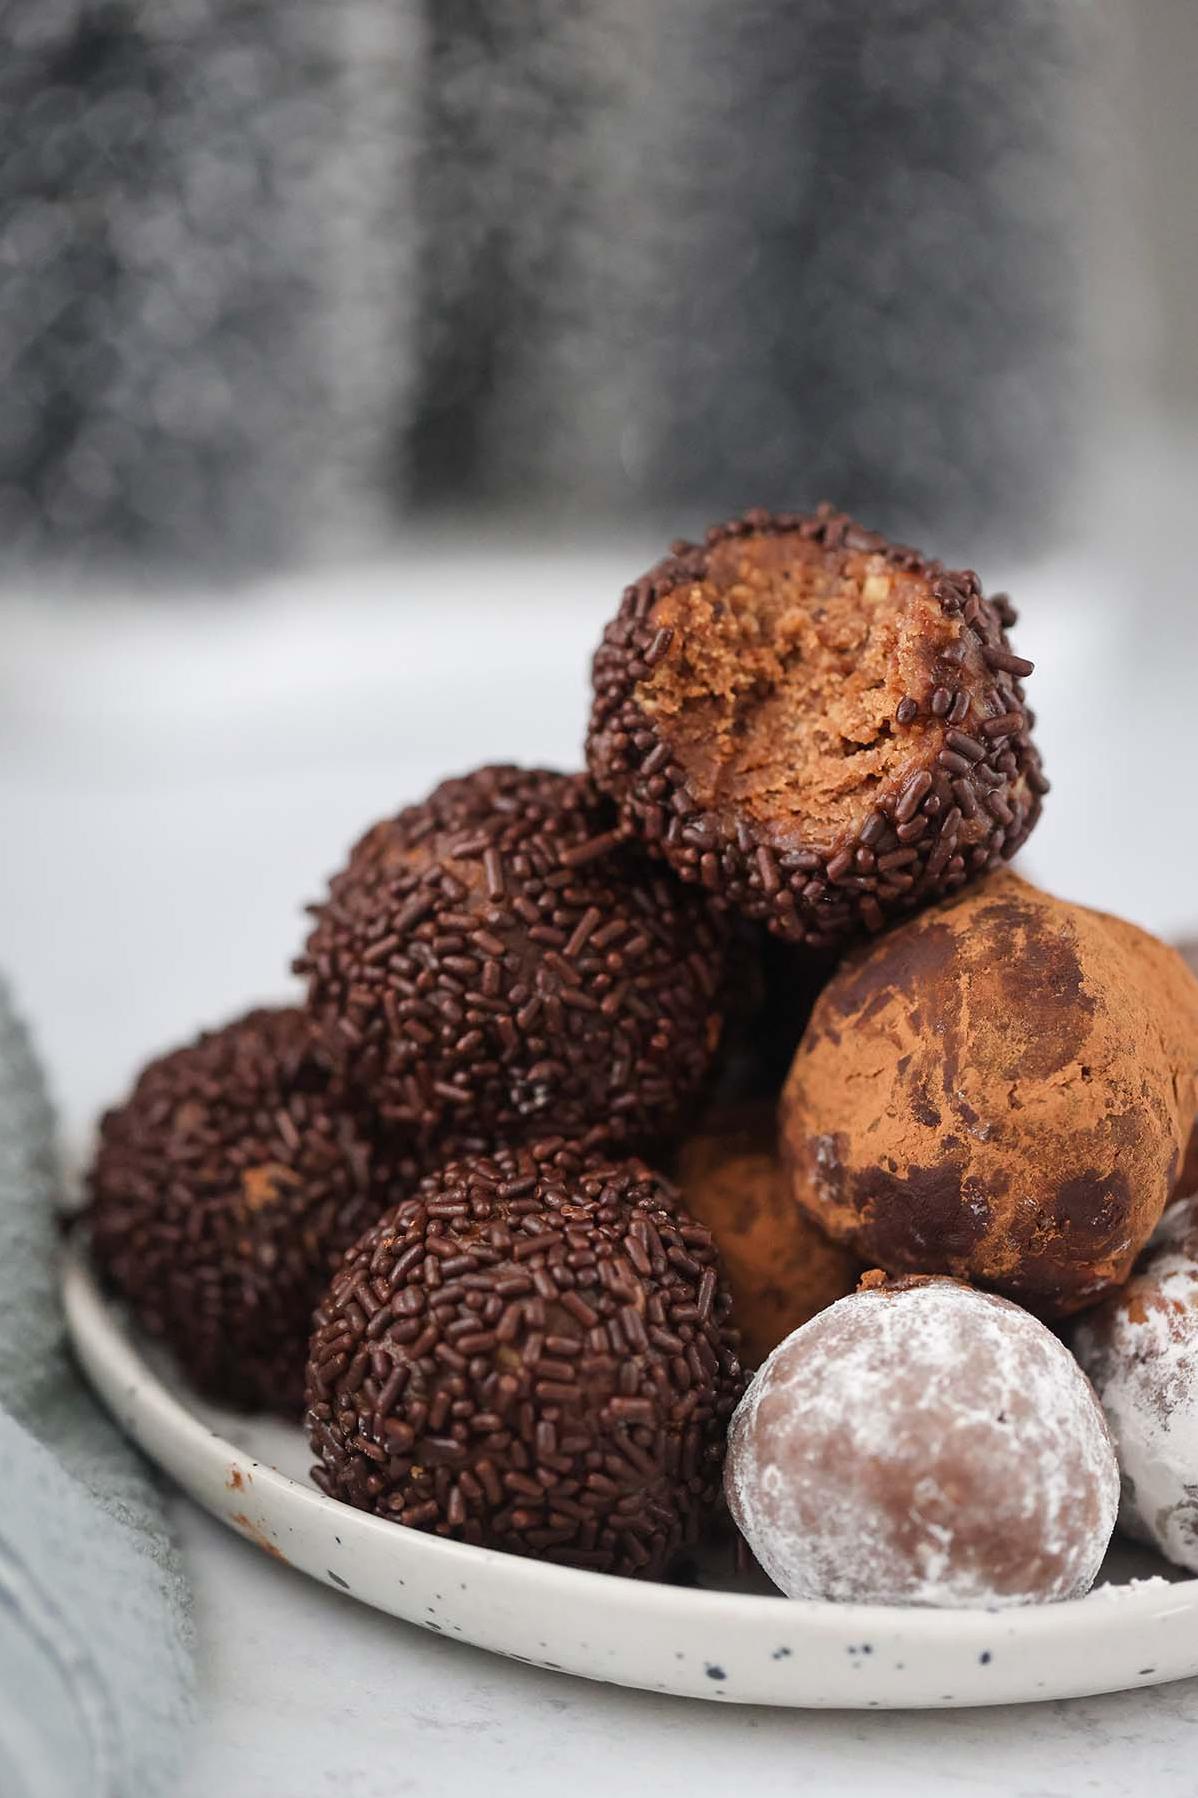  Make a big batch of Southern Rum Balls and watch them disappear in no time.